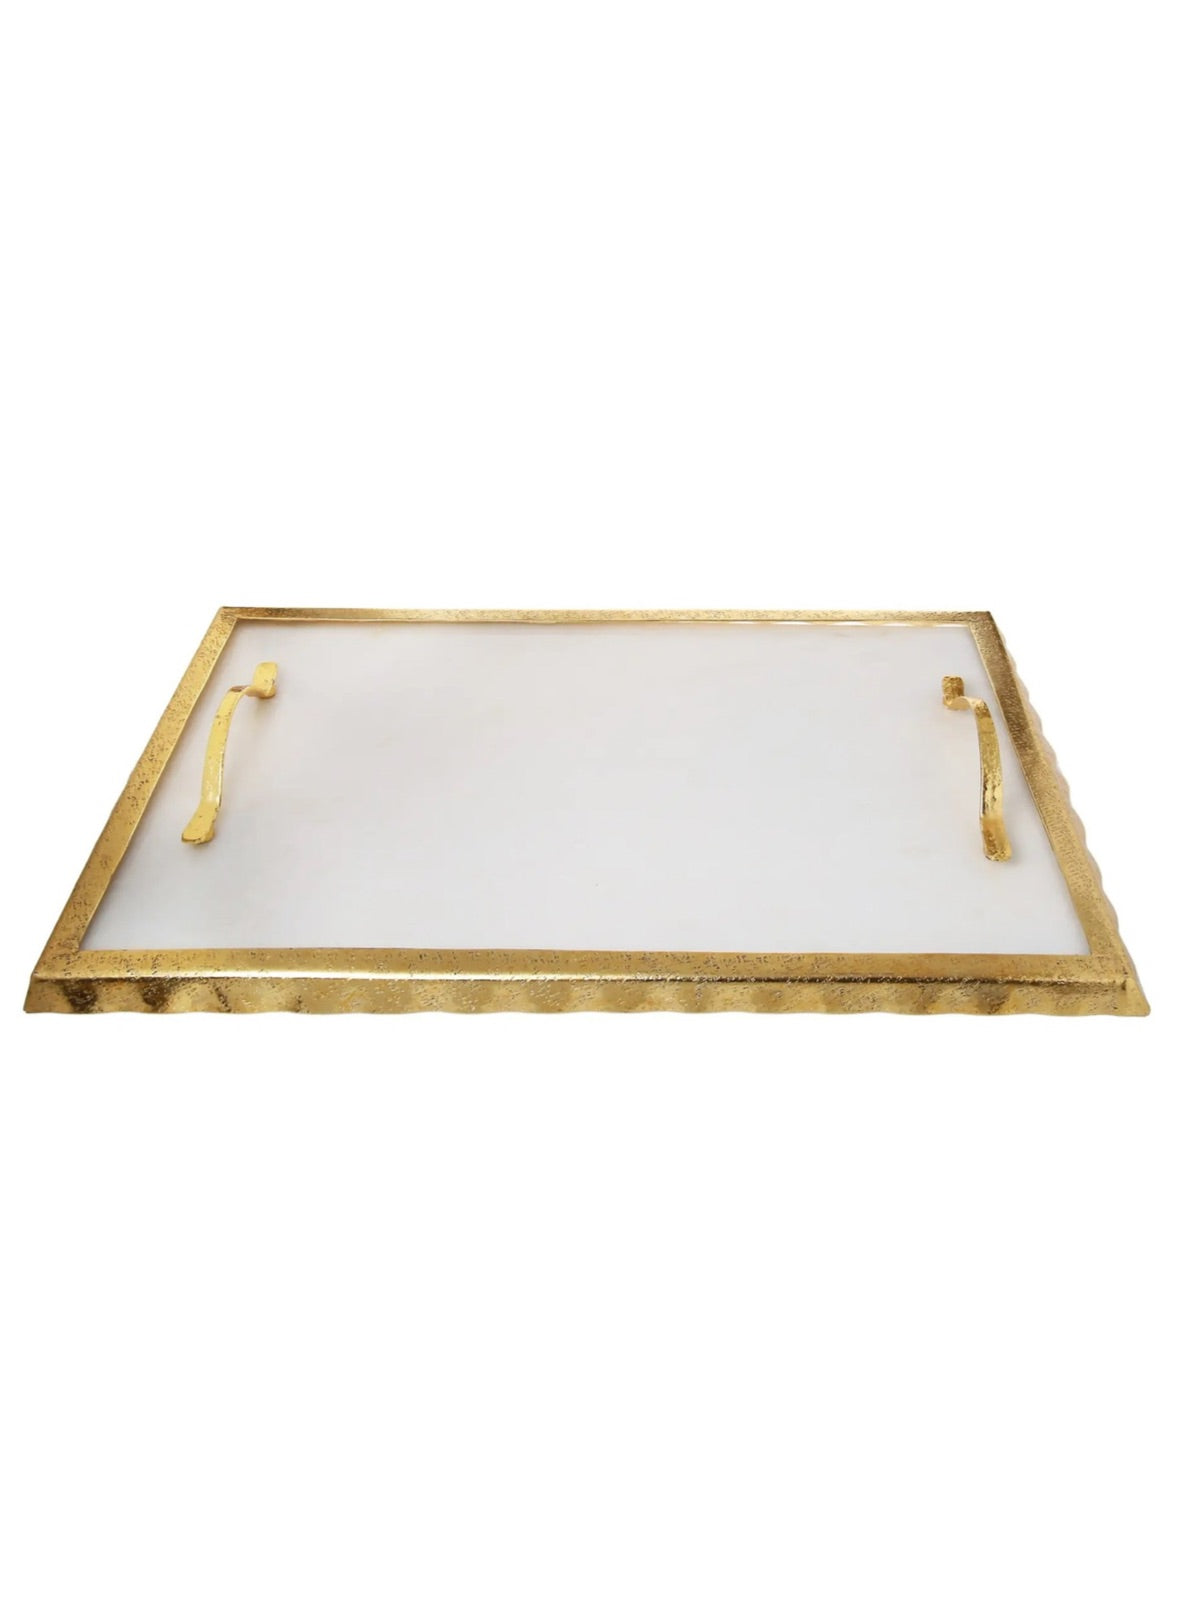 Rectangular Marble Serving Tray with Luxury Stainless Steel Gold Rim and Handles - KYA Home Decor